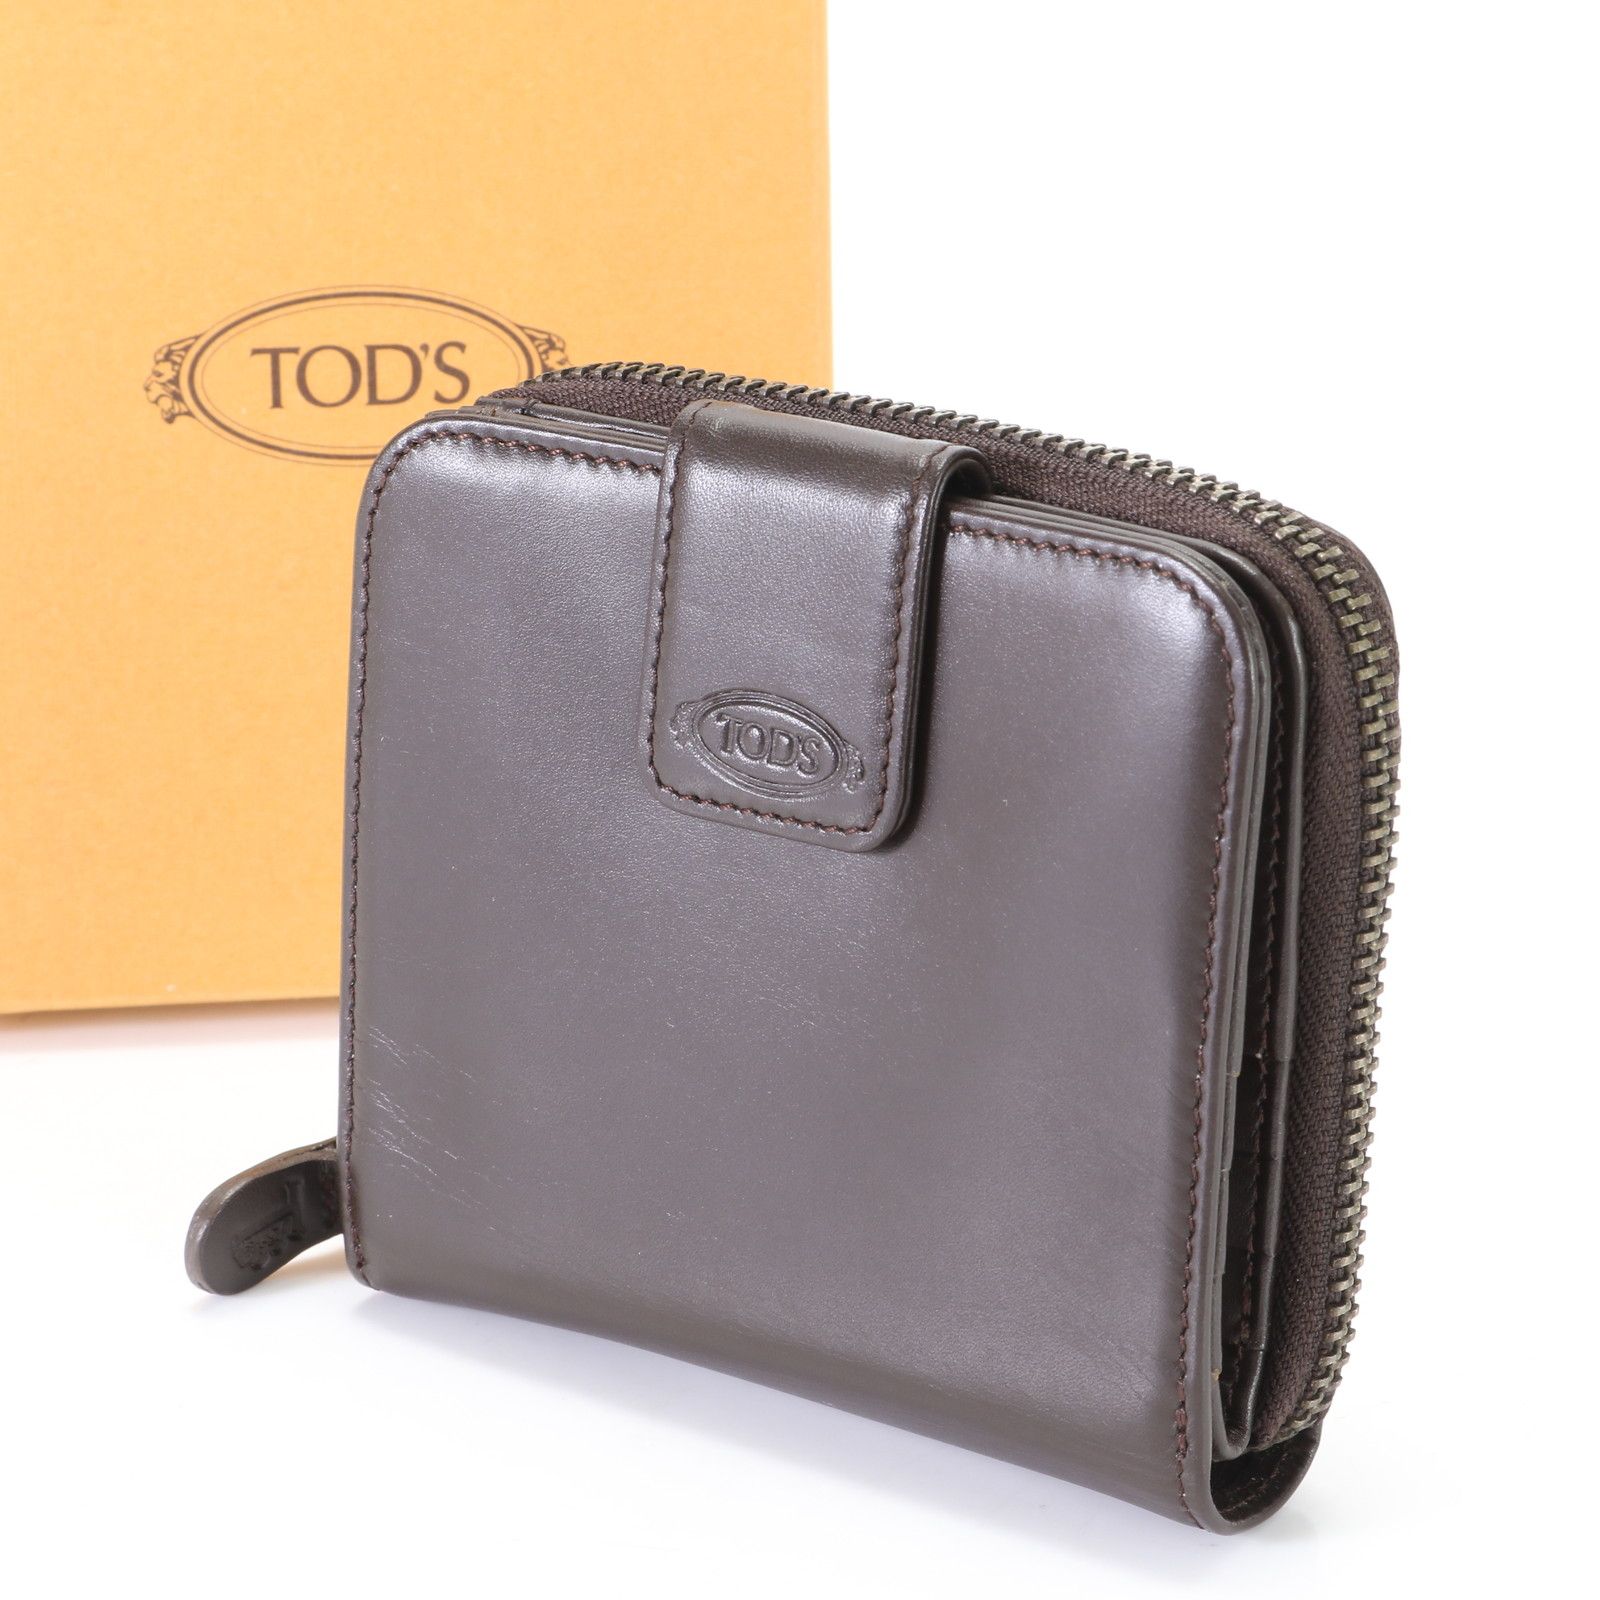 TODS トッズ 財布 二つ折り お札入れ 小銭入れなし コンパクト 美品 